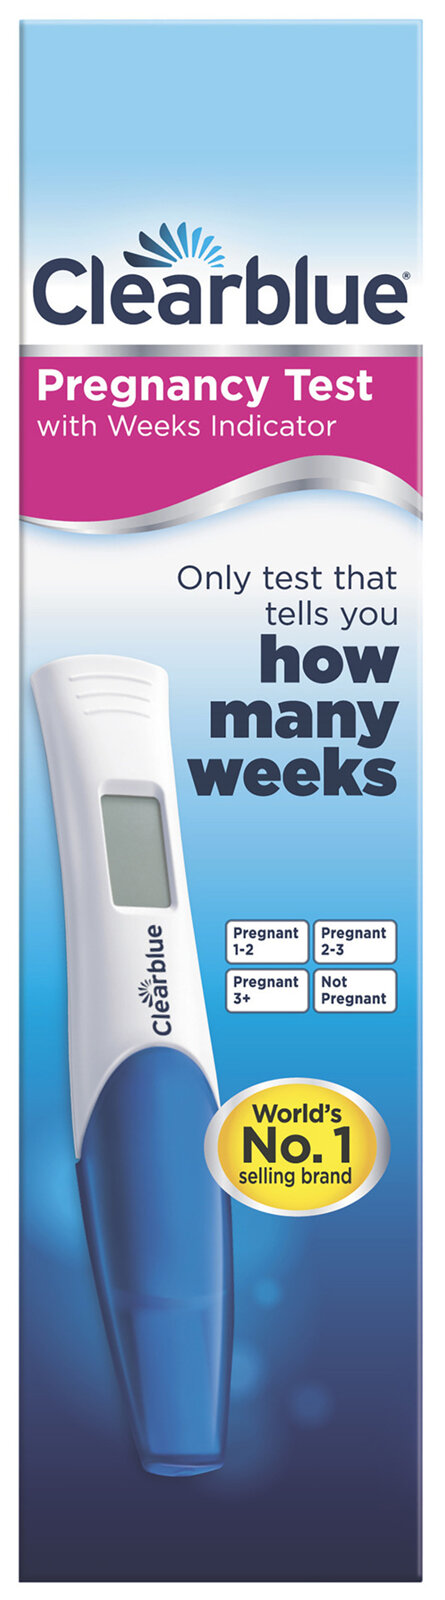 Clearblue Pregnancy Test with Weeks Indicator - Clearblue